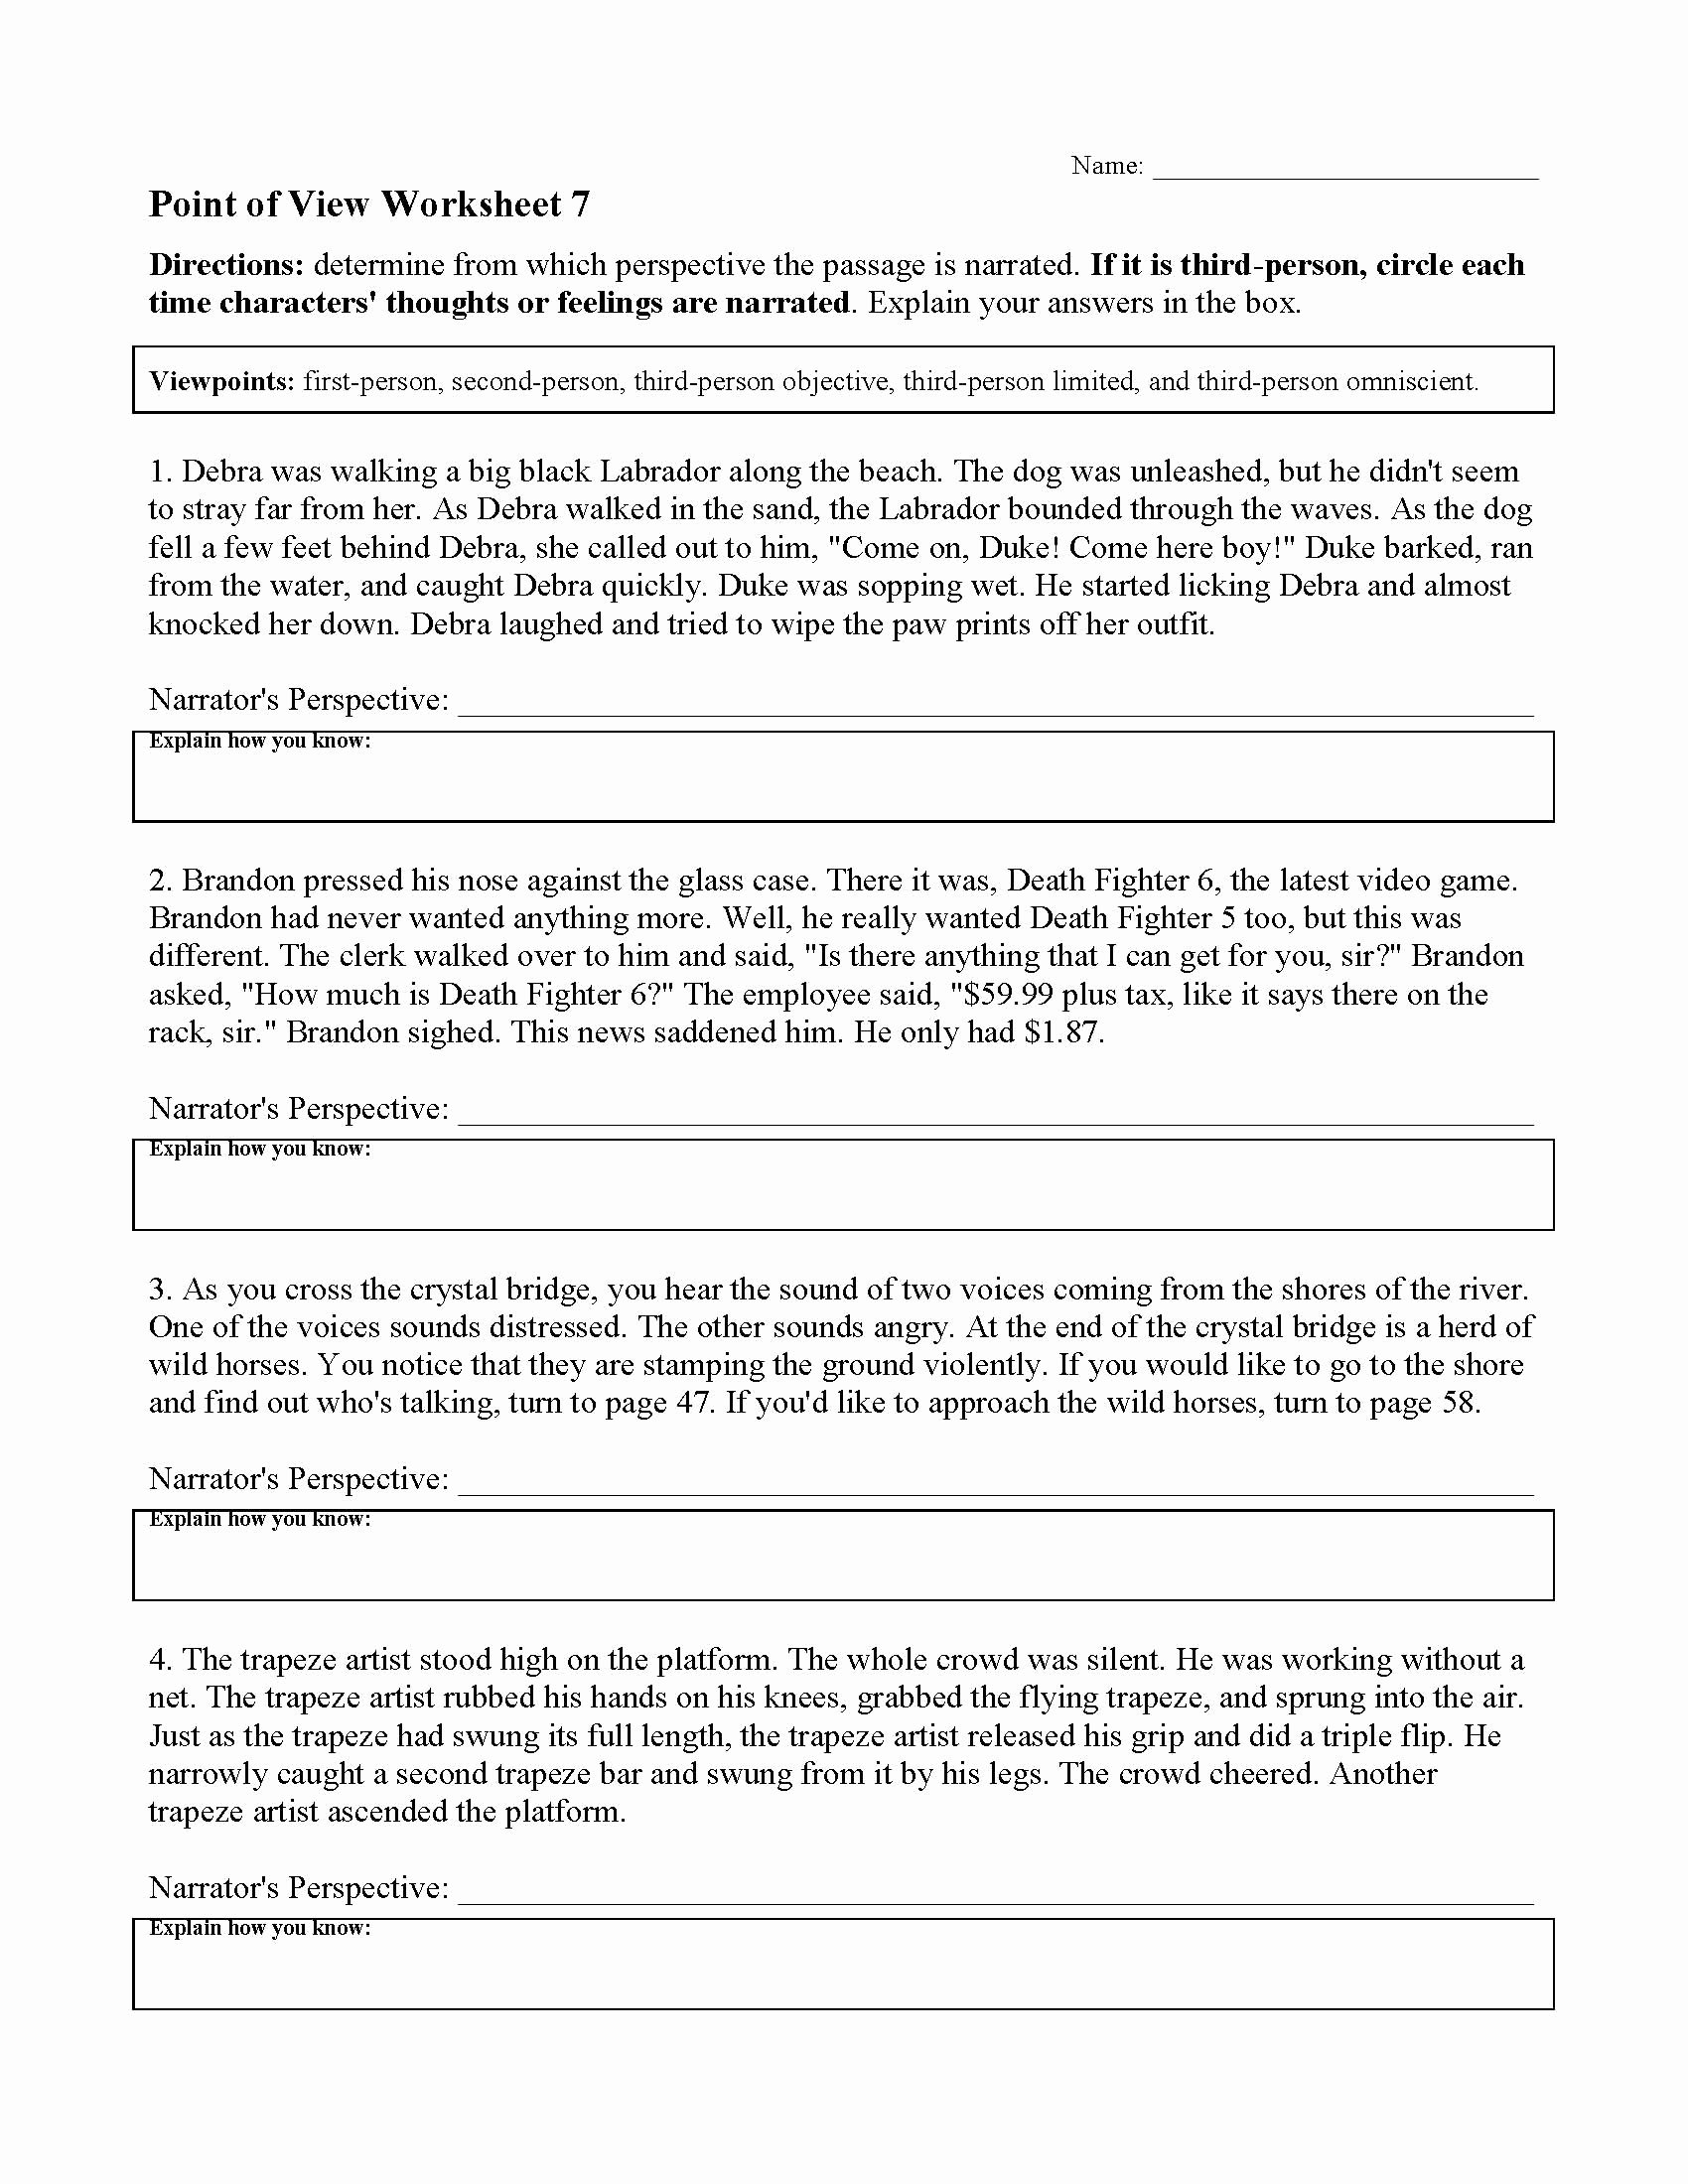 Newton&amp;#039;s Third Law Worksheet Answers Awesome Point Of View Worksheet 7